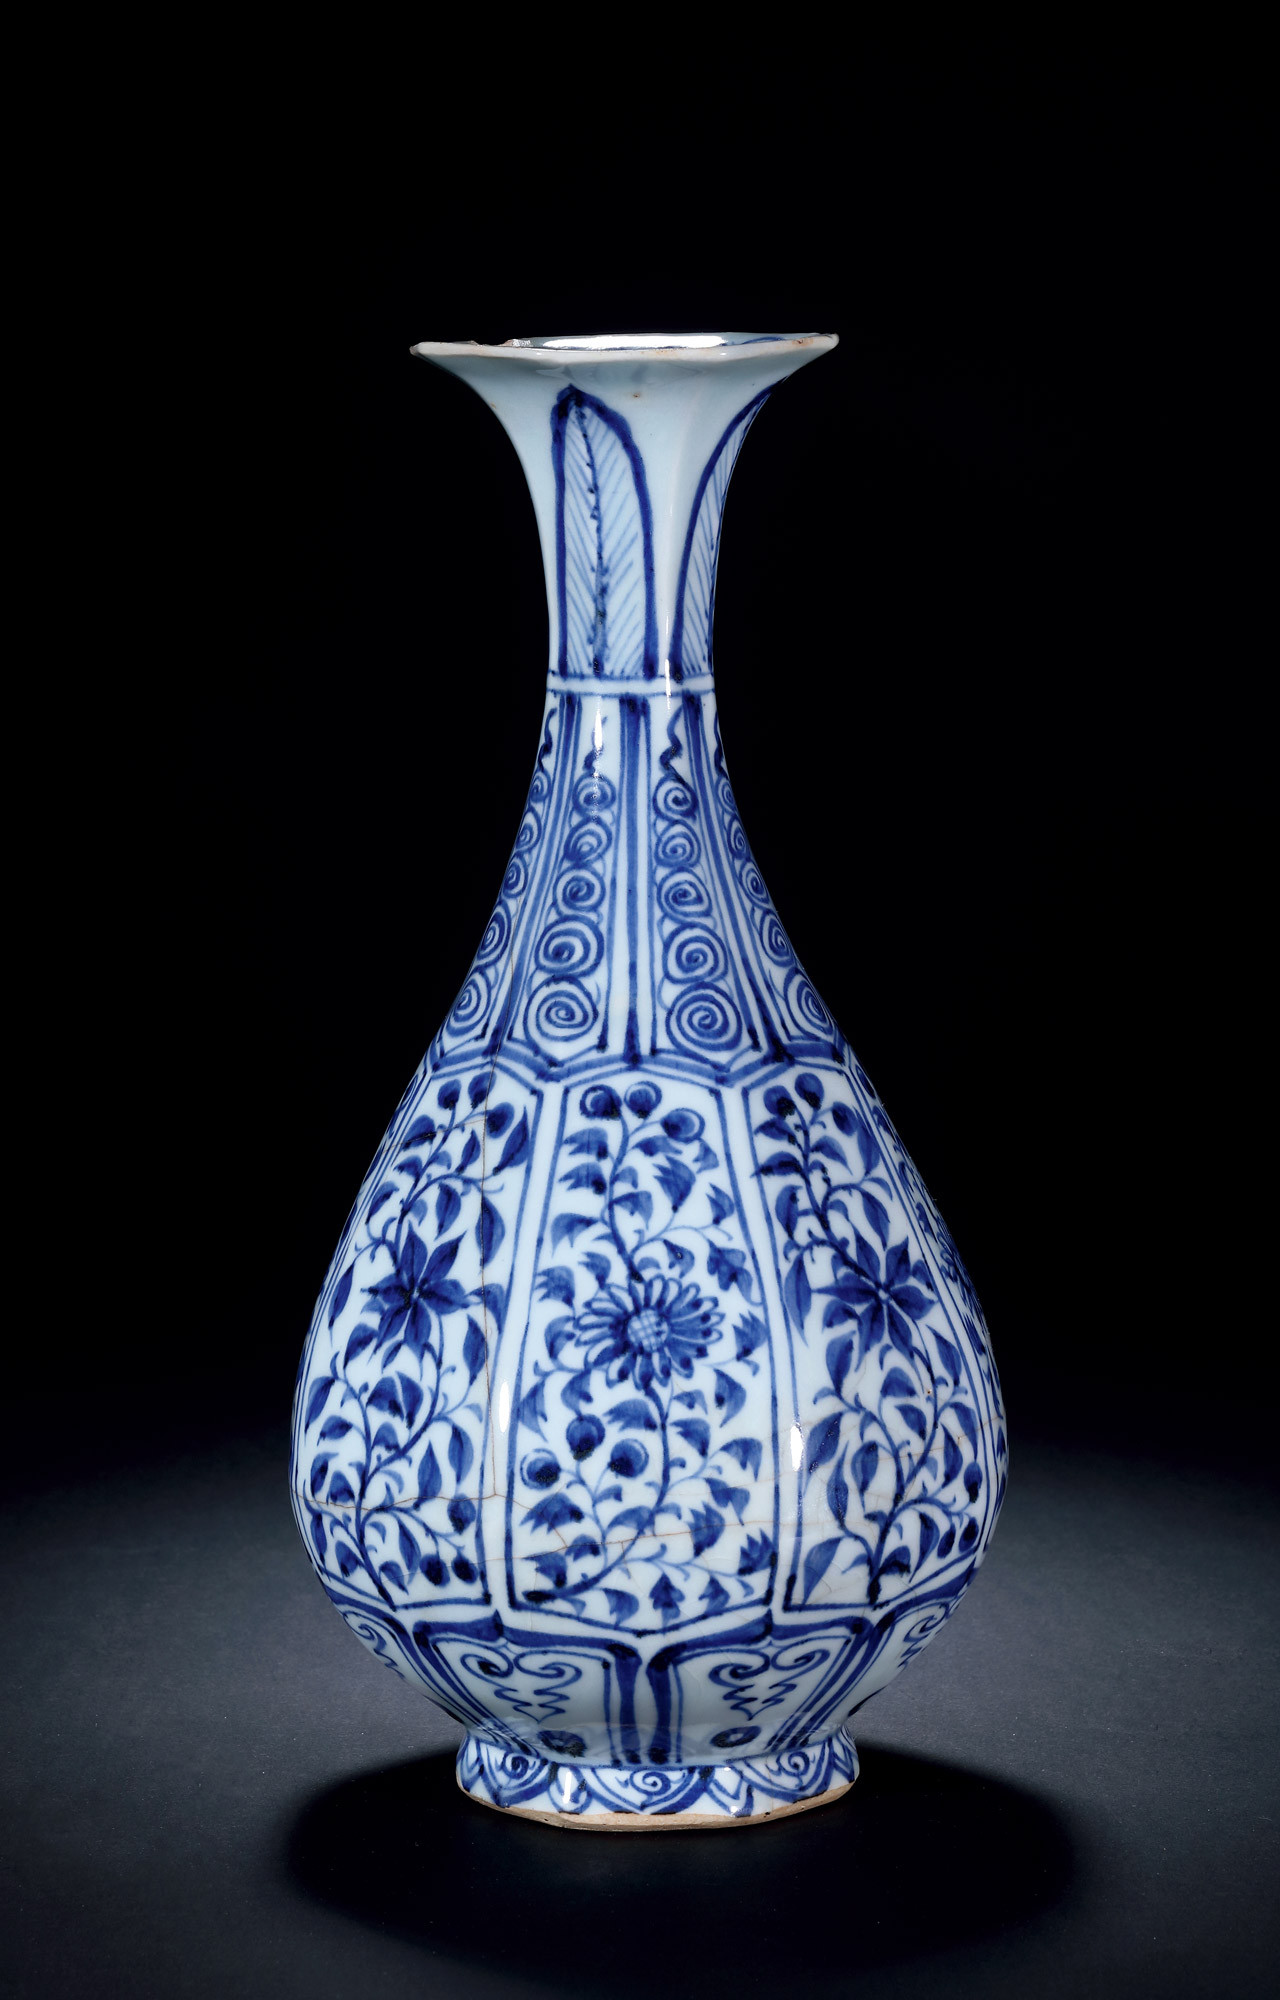 A BLUE AND WHITE PEAR-SHAPED VASE, YUHUCHUN, DECORATED WITH‘FLORAL’ DESIGN